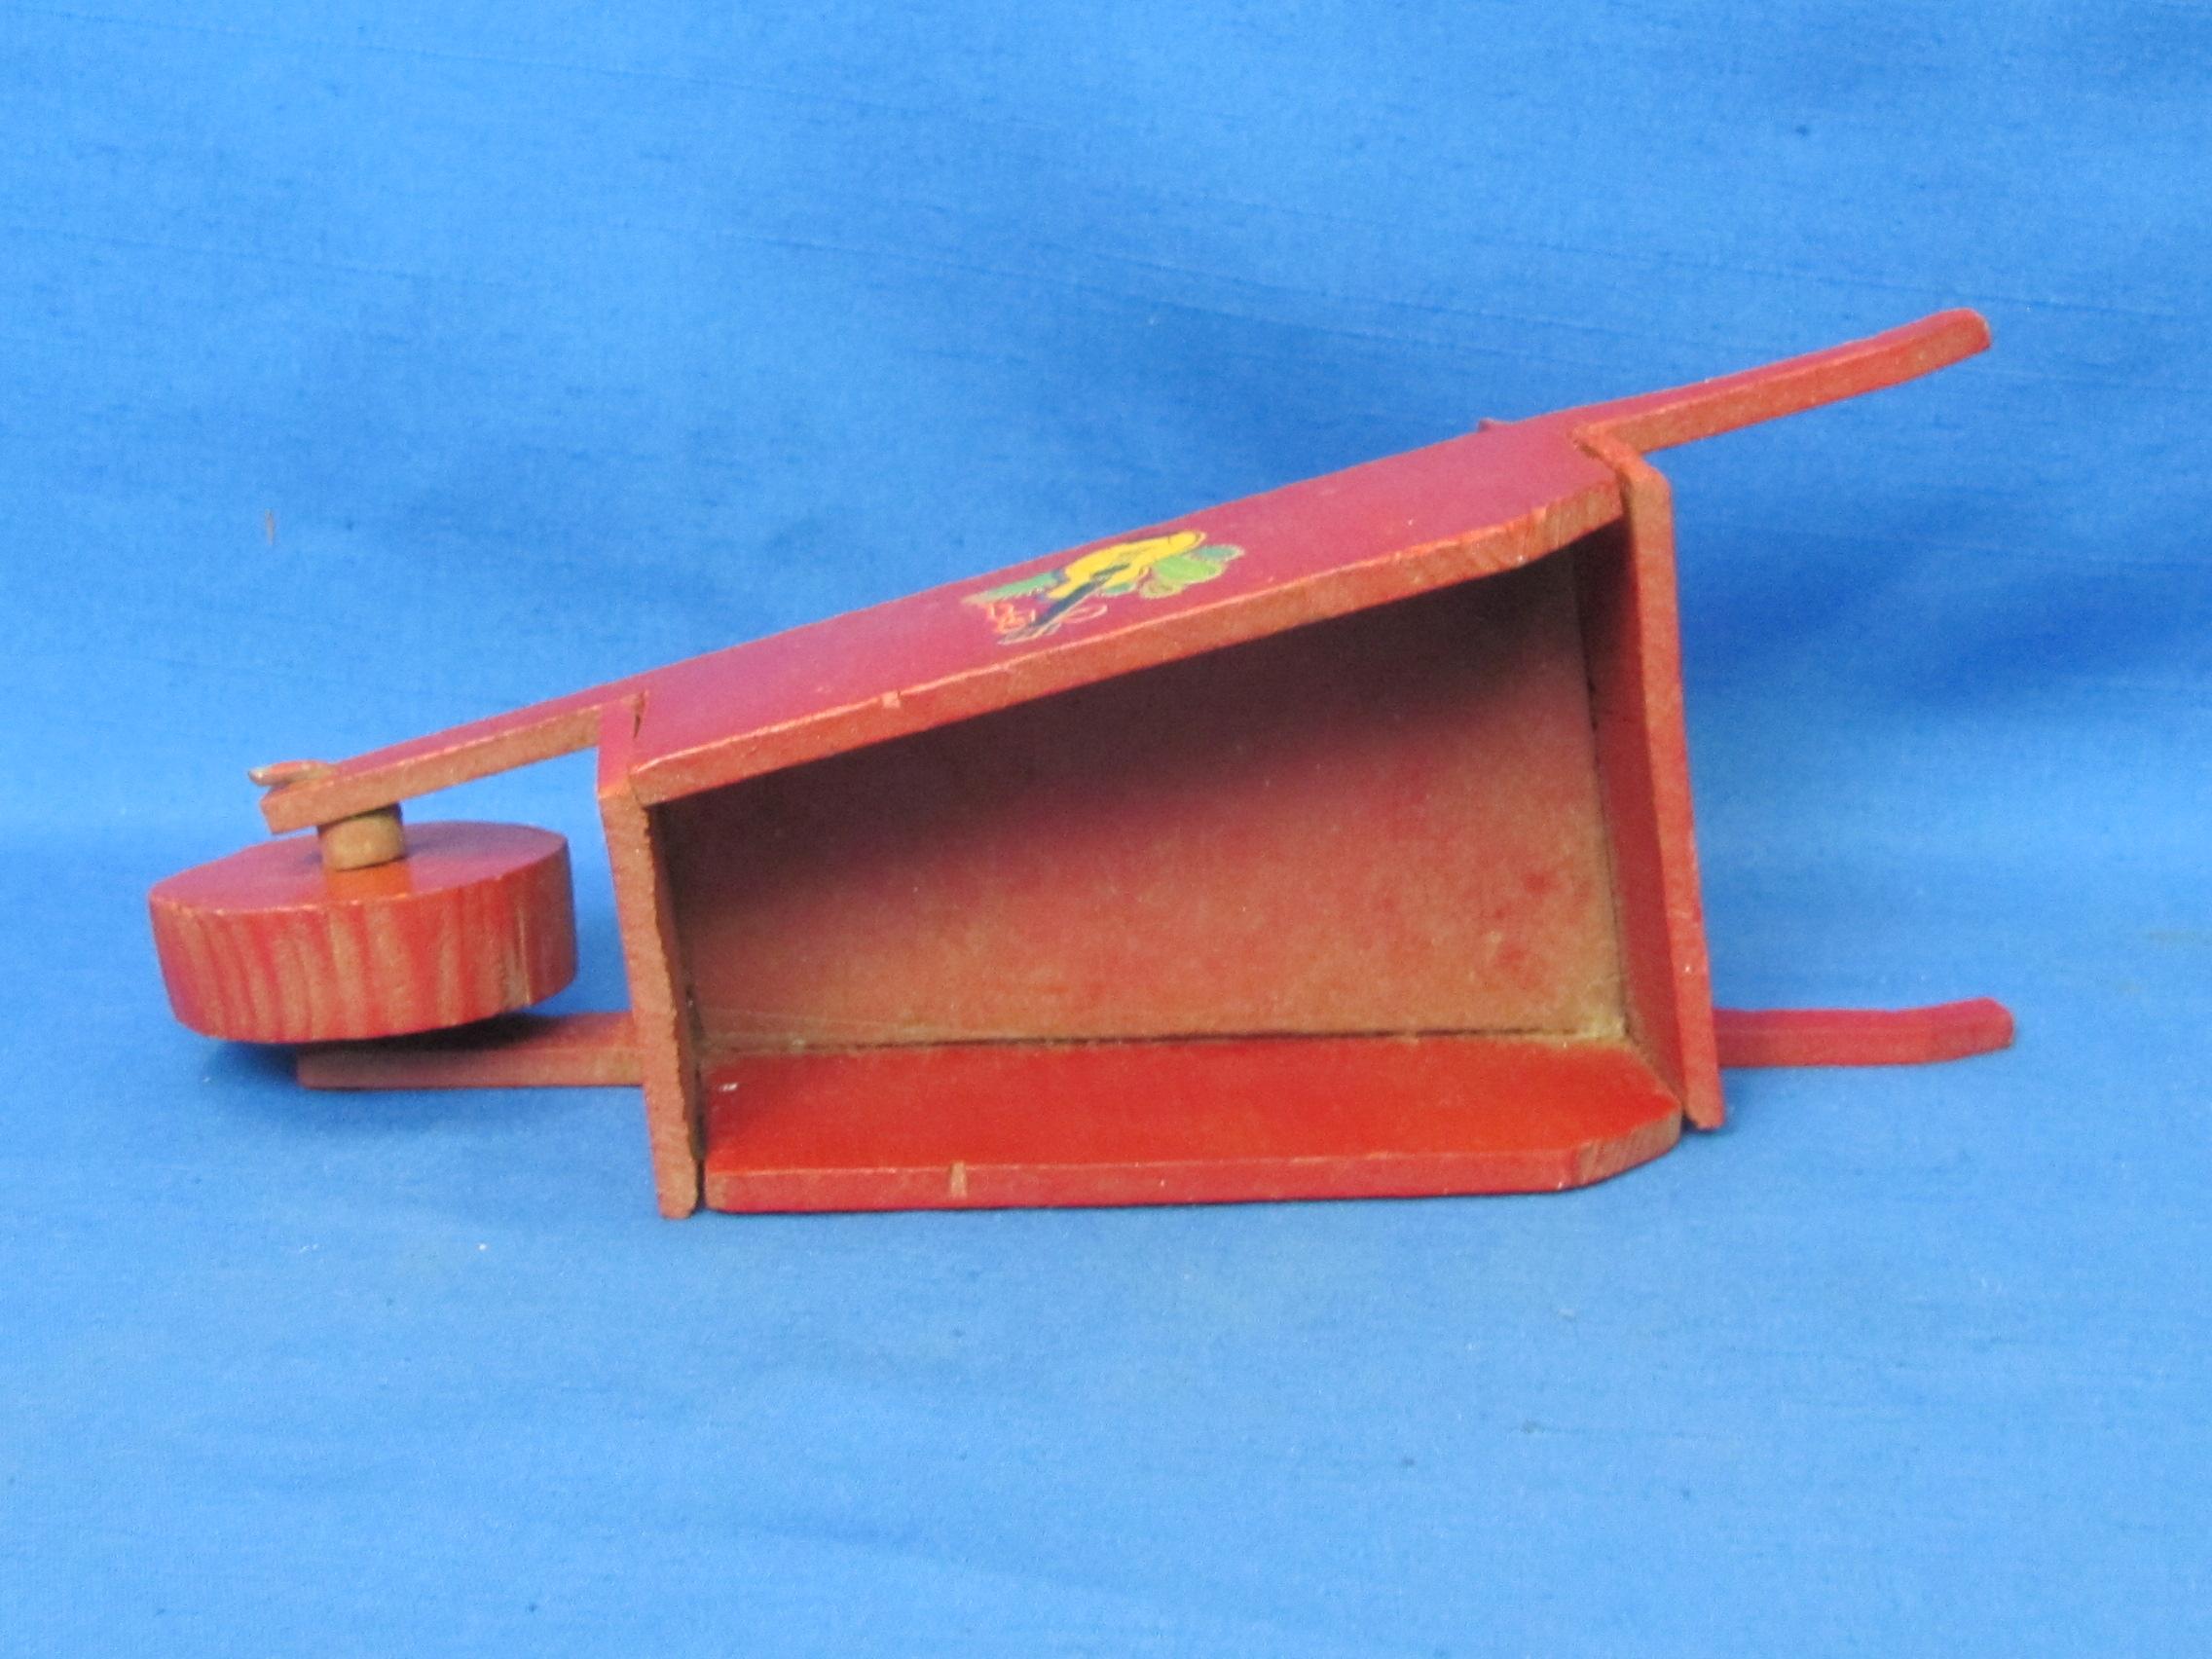 2 Decorative Wood Wheelbarrows – 1 Painted Red – Both about 10 1/2” long – Great Displays